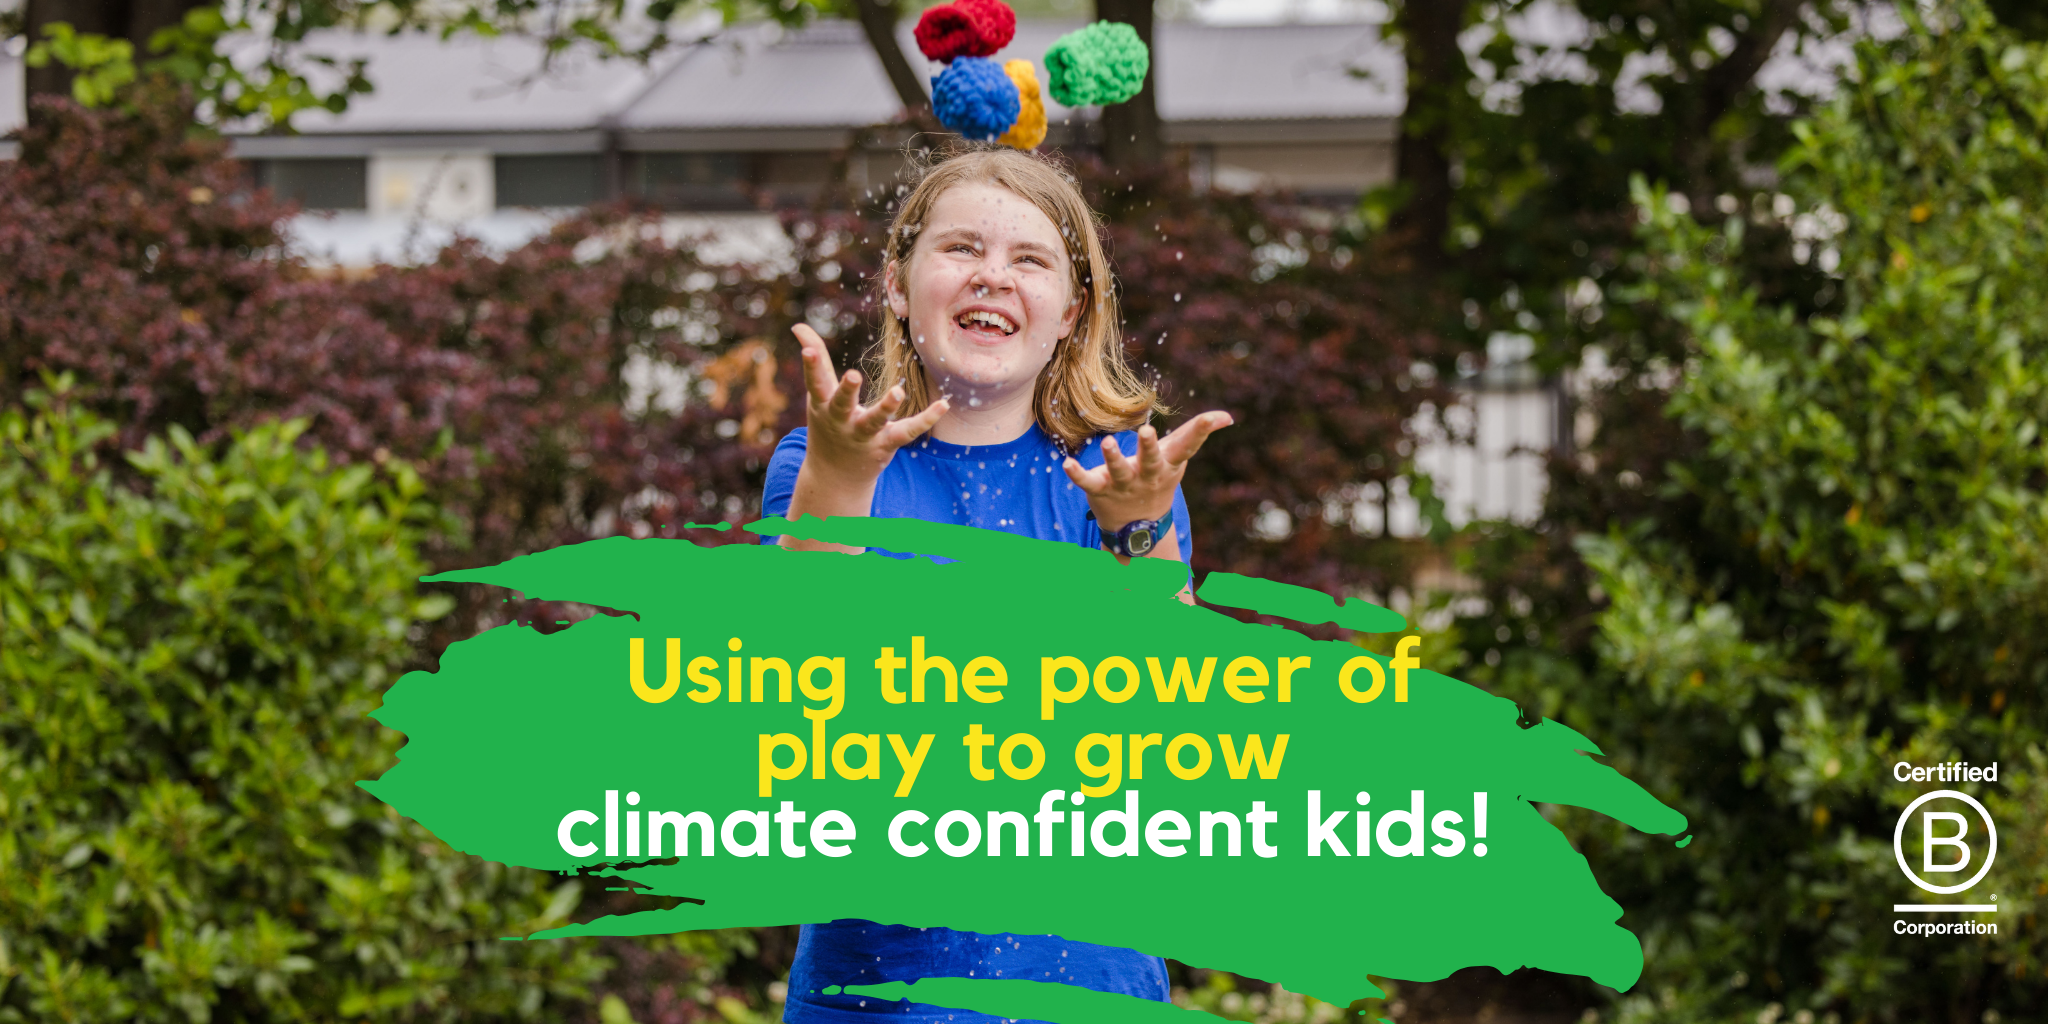 A 11 year old girl standing in a park laughing, and throwing EcoSplat Reusable Water Balloons in the air. Text says "Using the power of play to grow climate confident kids!" Logo of B Corp in the right bottom corner